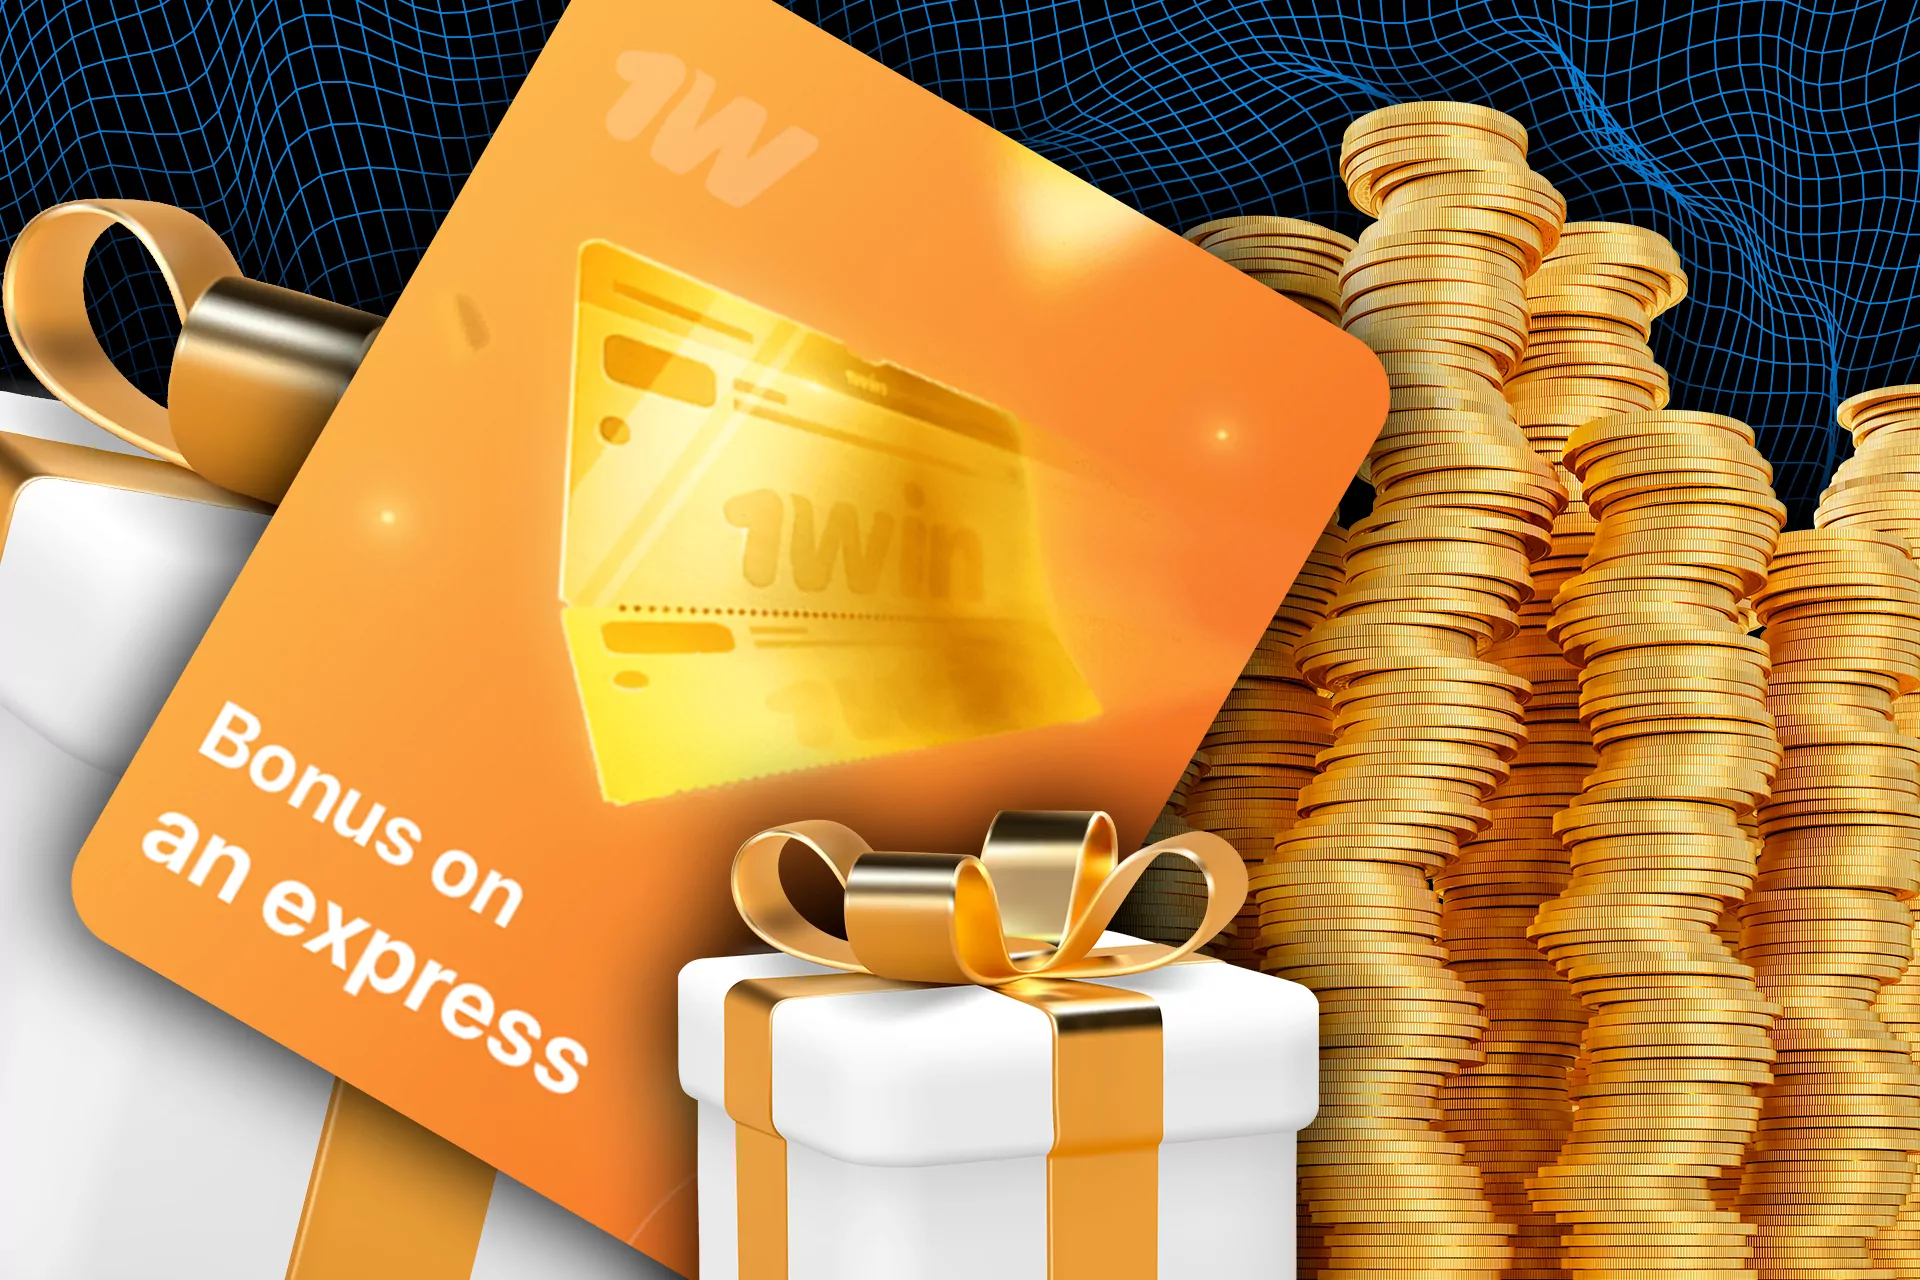 Bonus on express is an additional possibility to increase your profit from cricket betting.